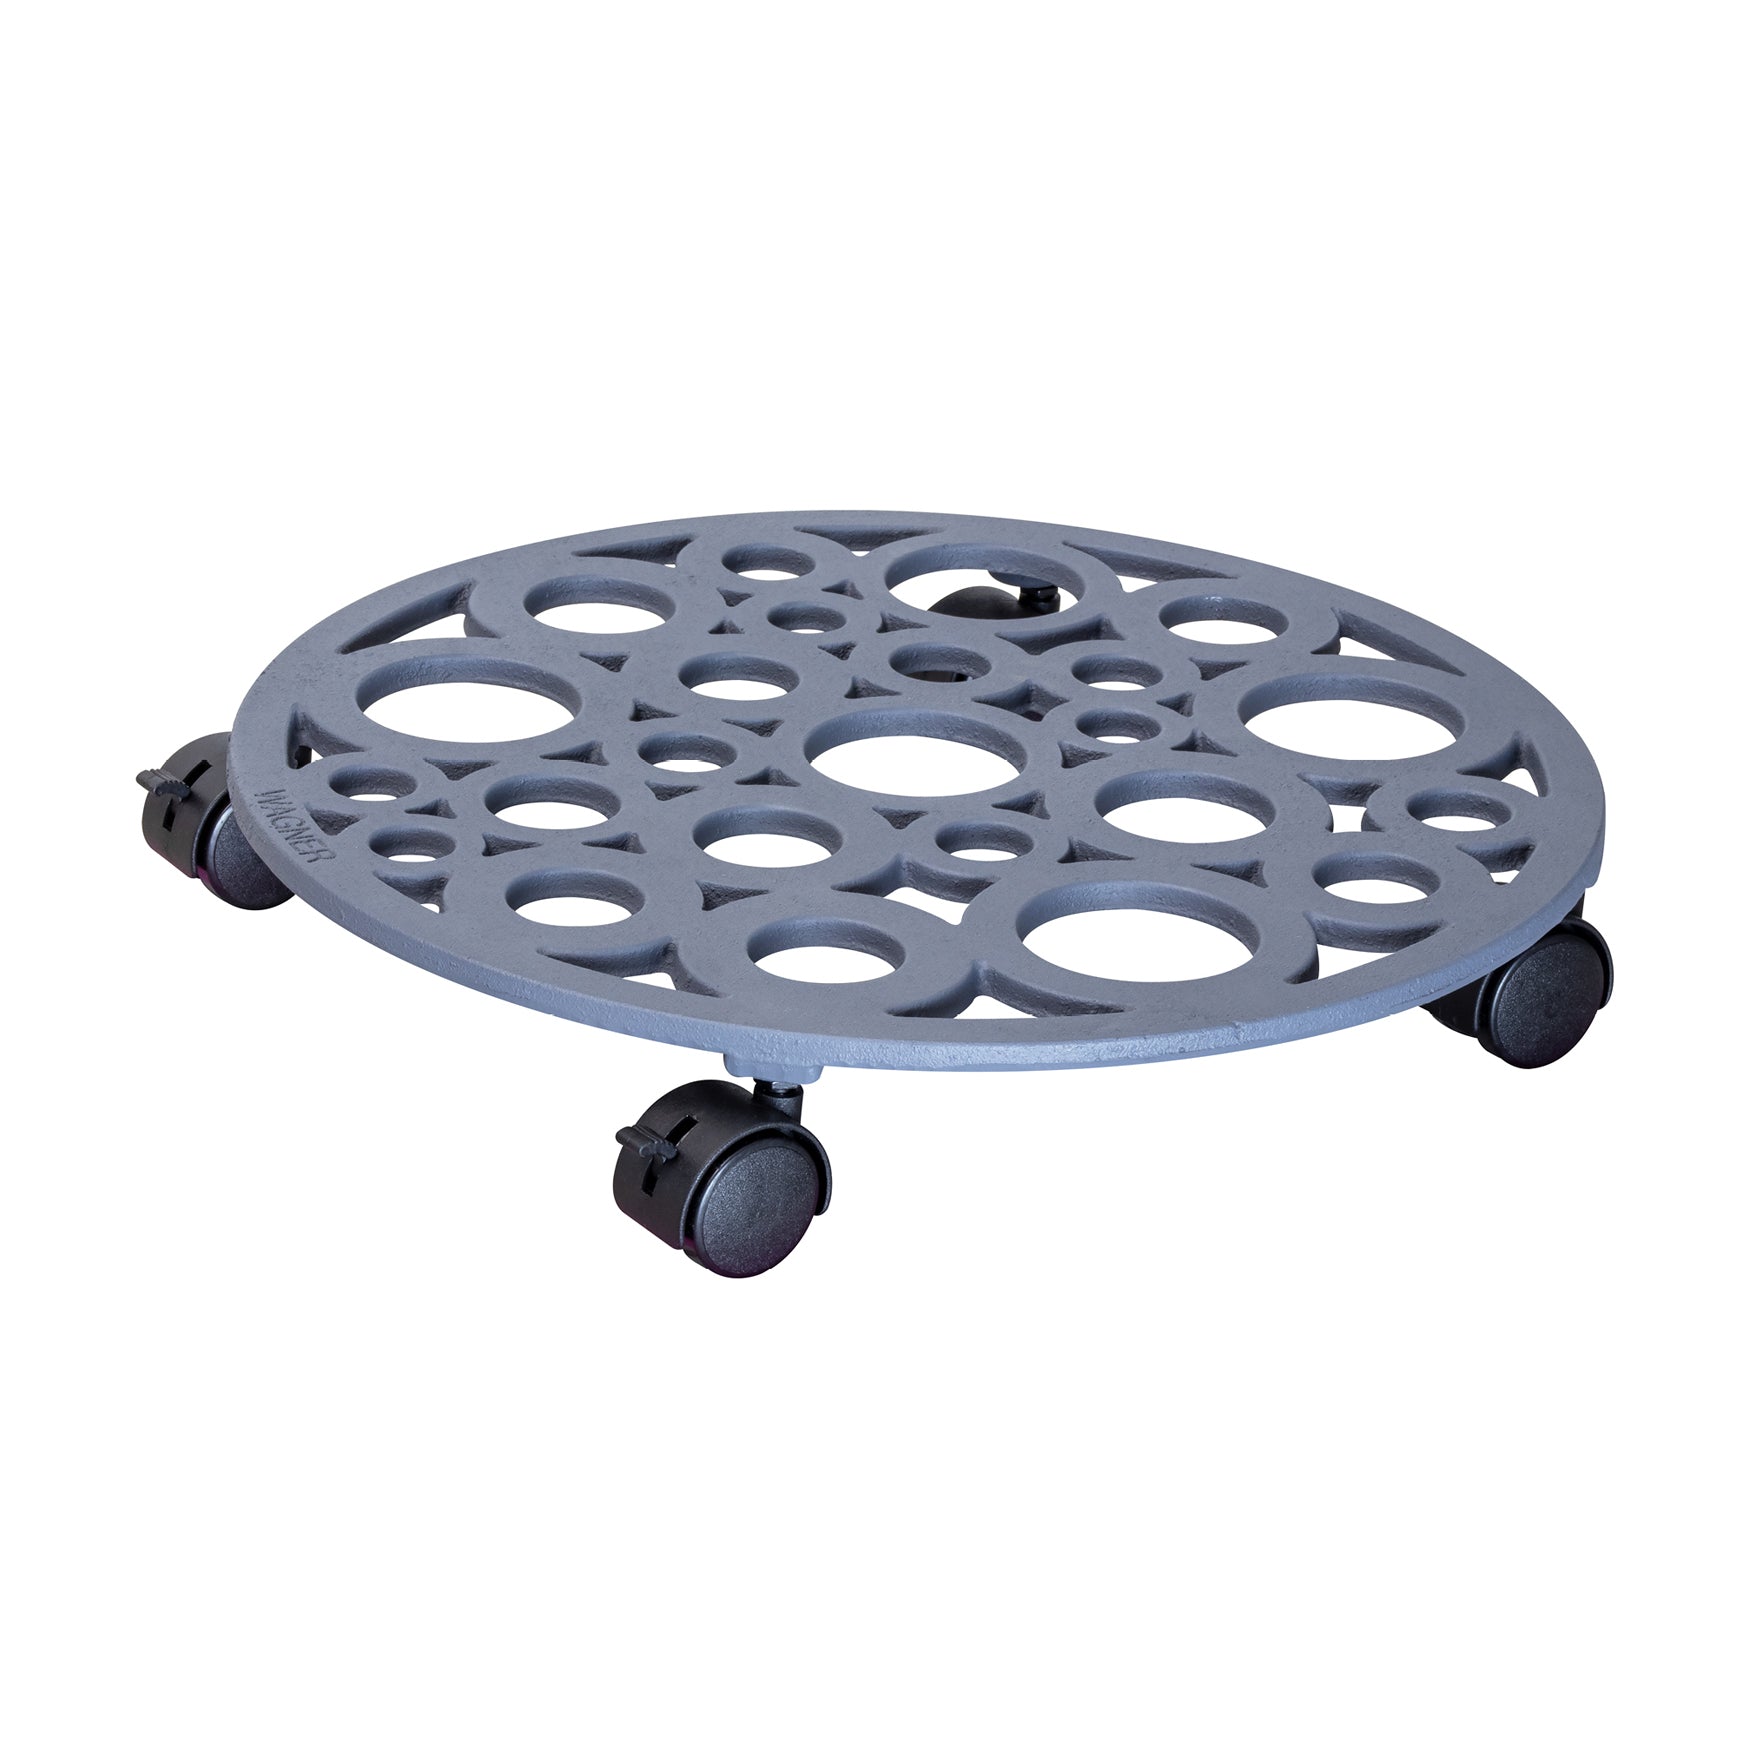 Pewter Round Cast Iron Plant Caddy with brakes. Water resistant. 165 lbs capacity 15" diameter. 